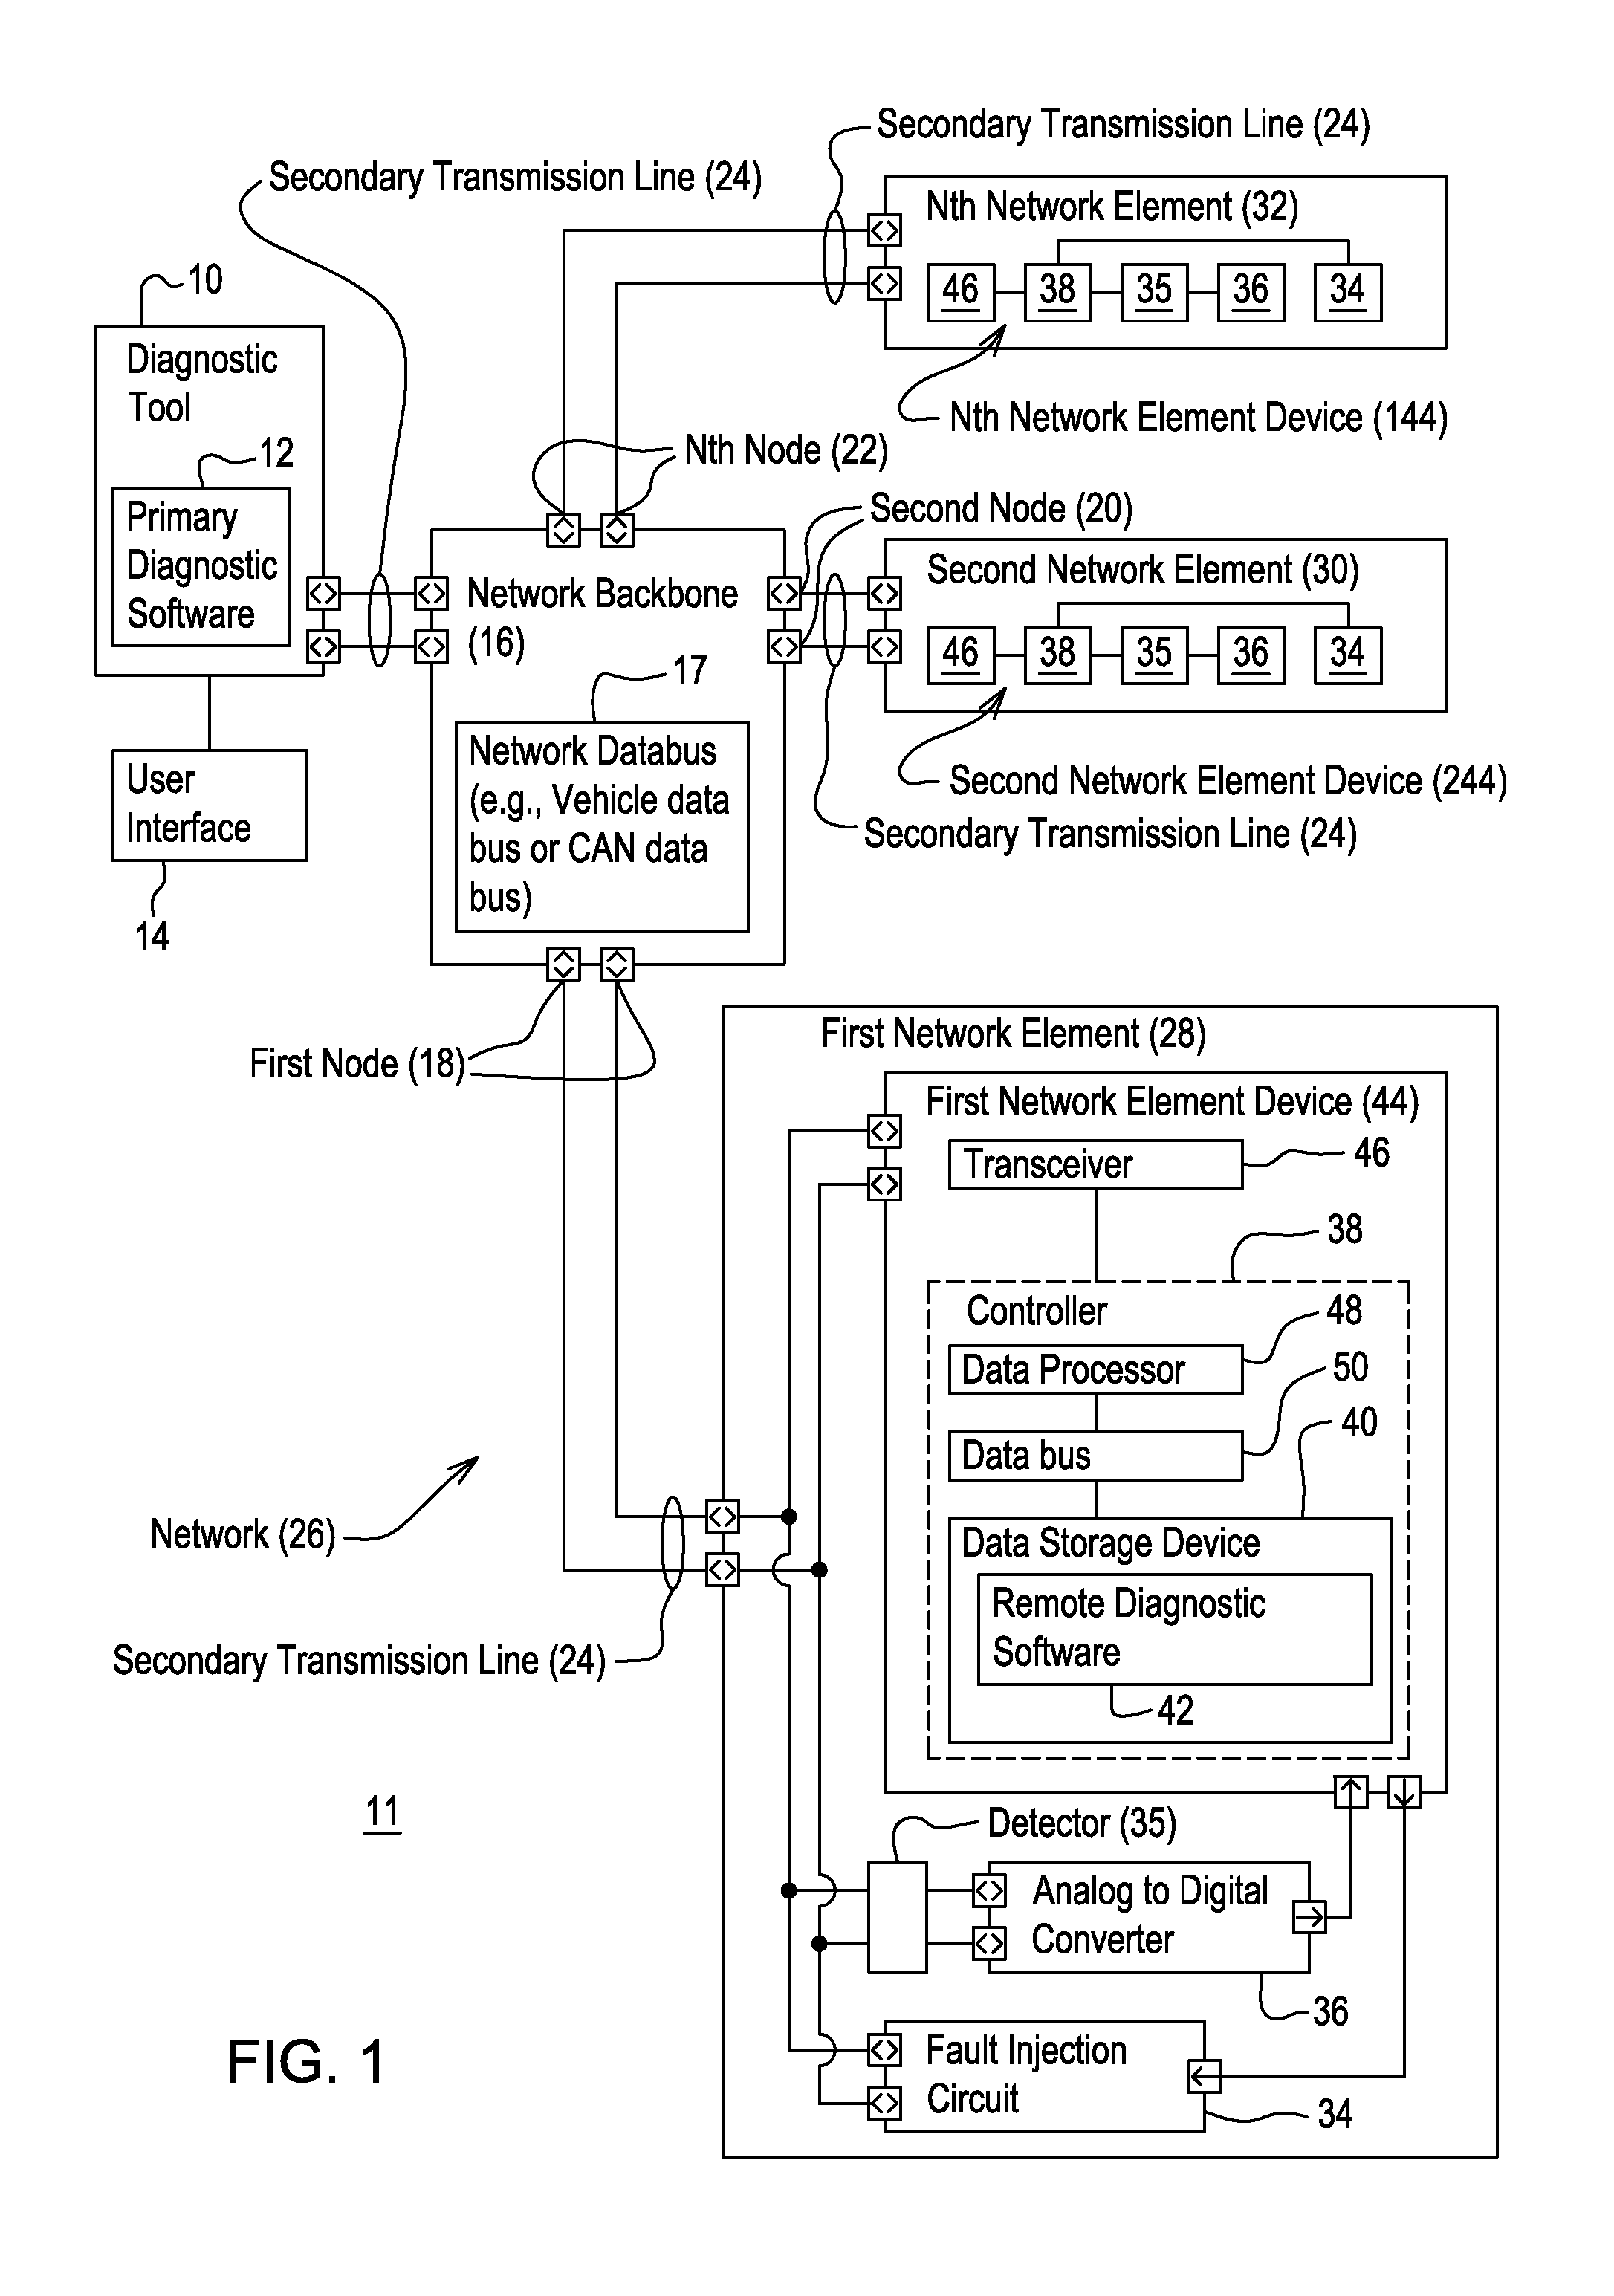 Method and system for diagnosing a fault or open circuit in a network